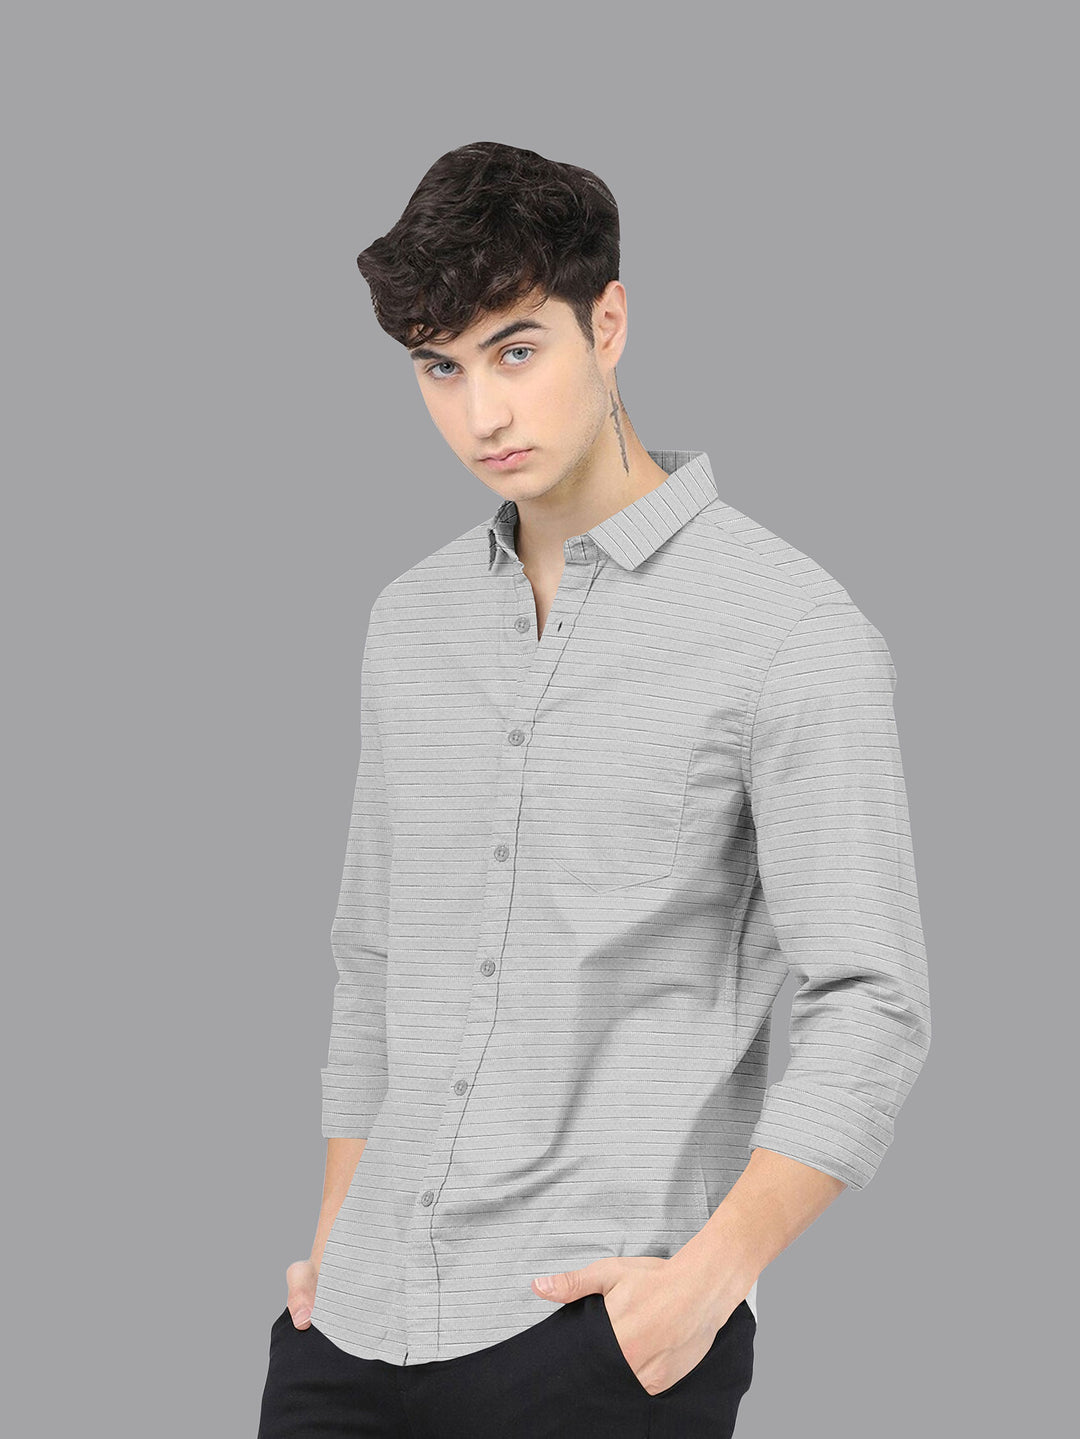 Grey Color Weft Dobby Soft Cotton Solid Shirt